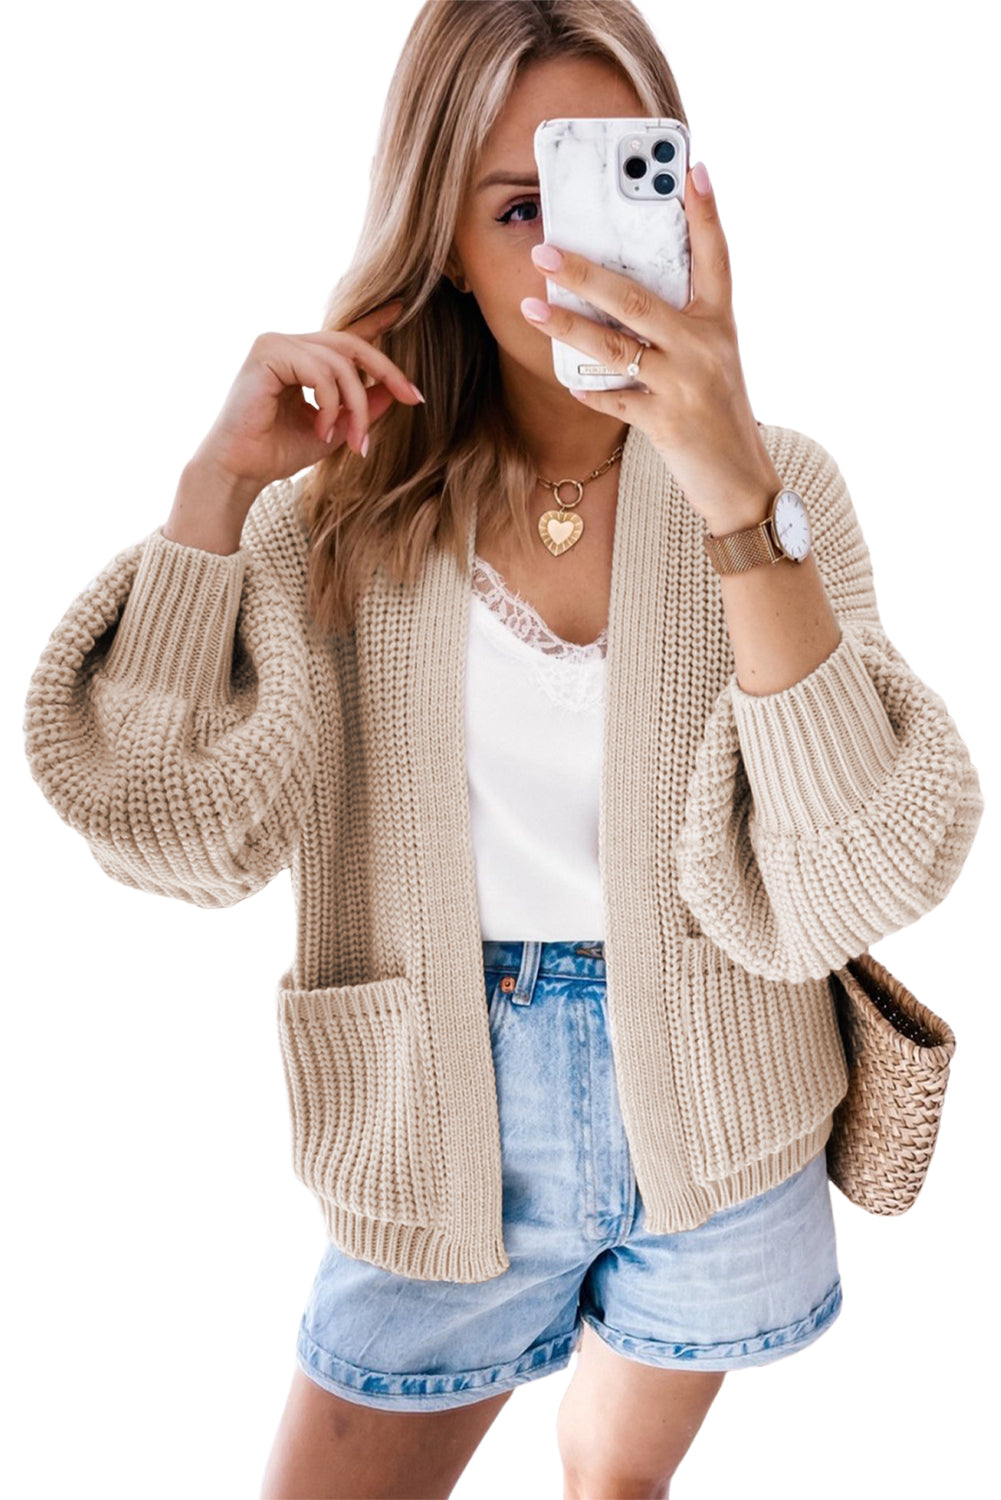 Apricot Solid Pocketed Open Short Cardigan